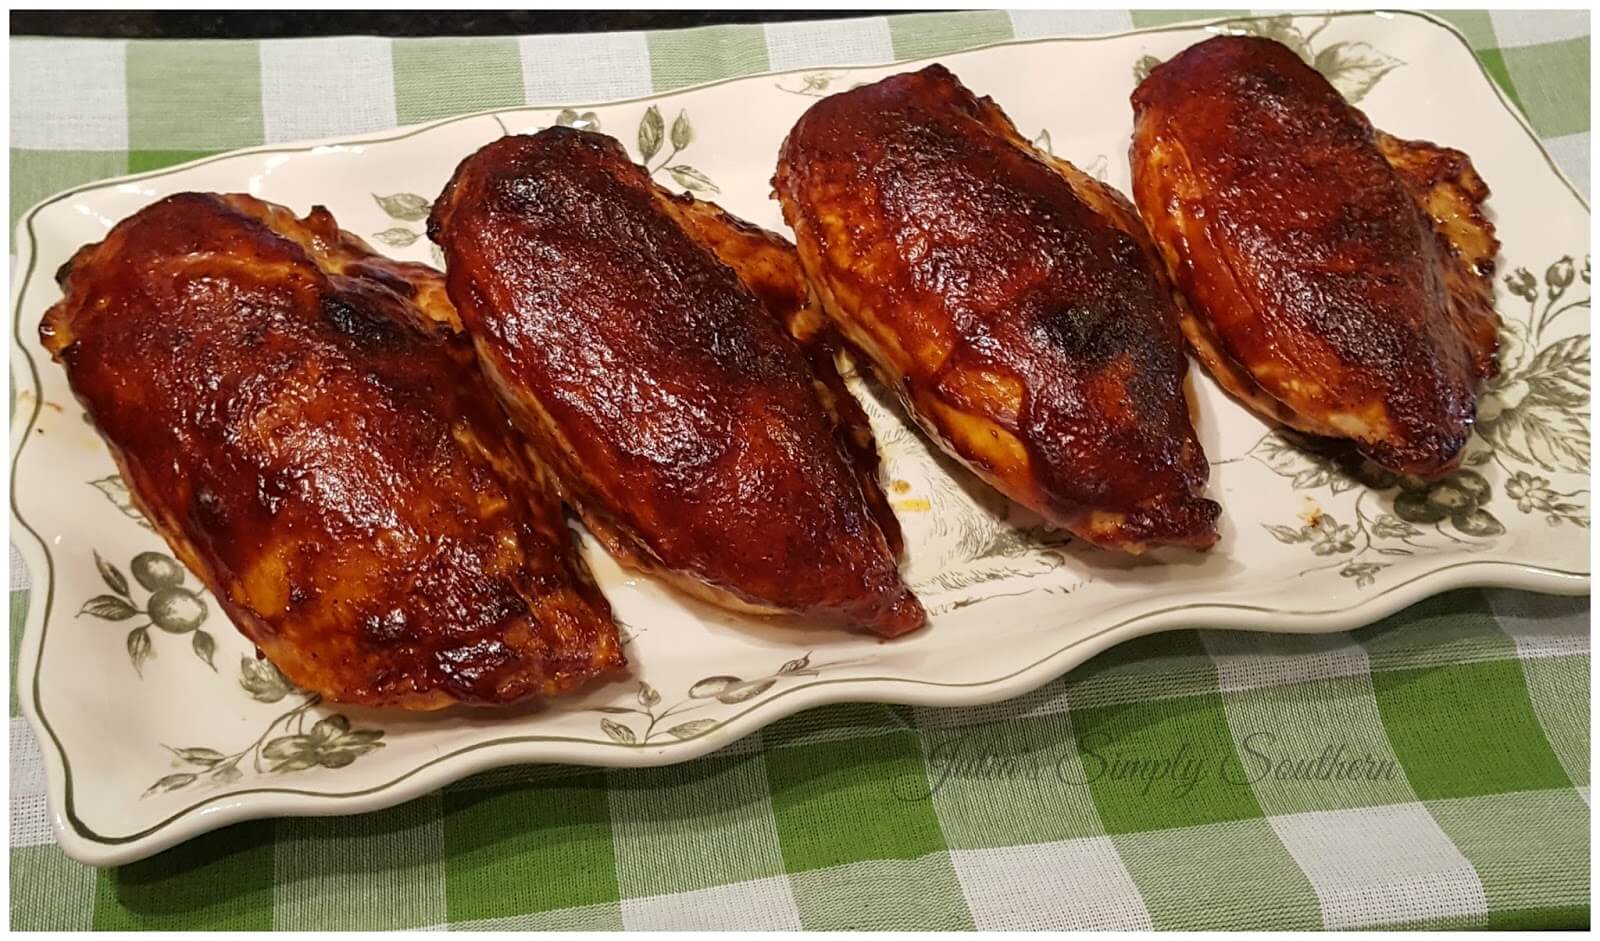 Baked chicken glazed with barbecue on a platter